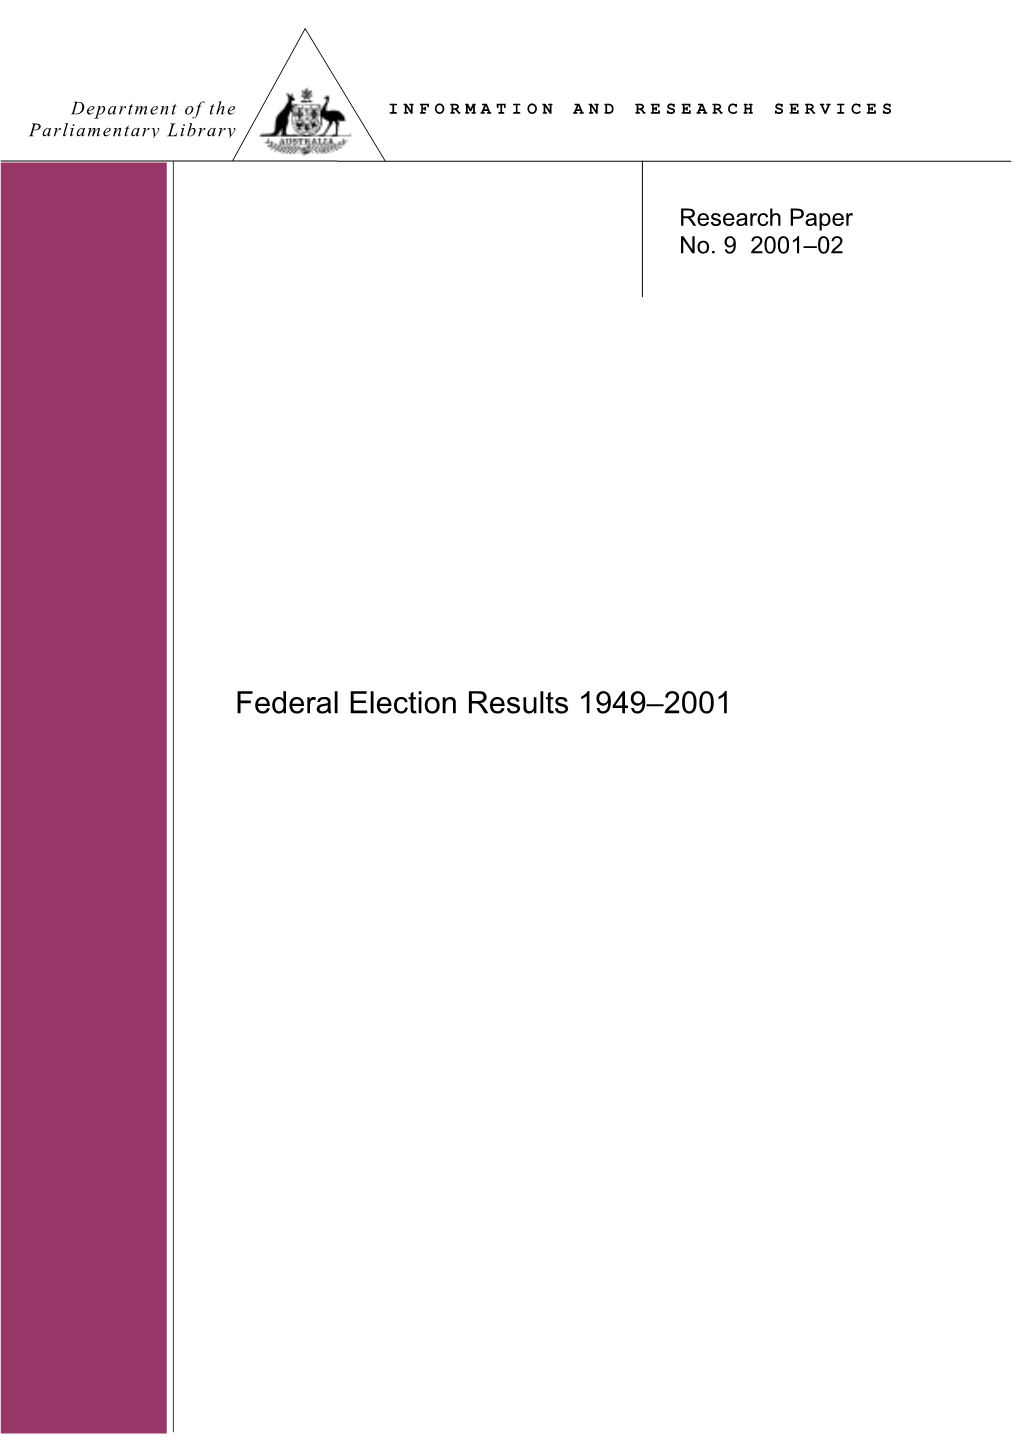 Federal Election Results 1949-2001